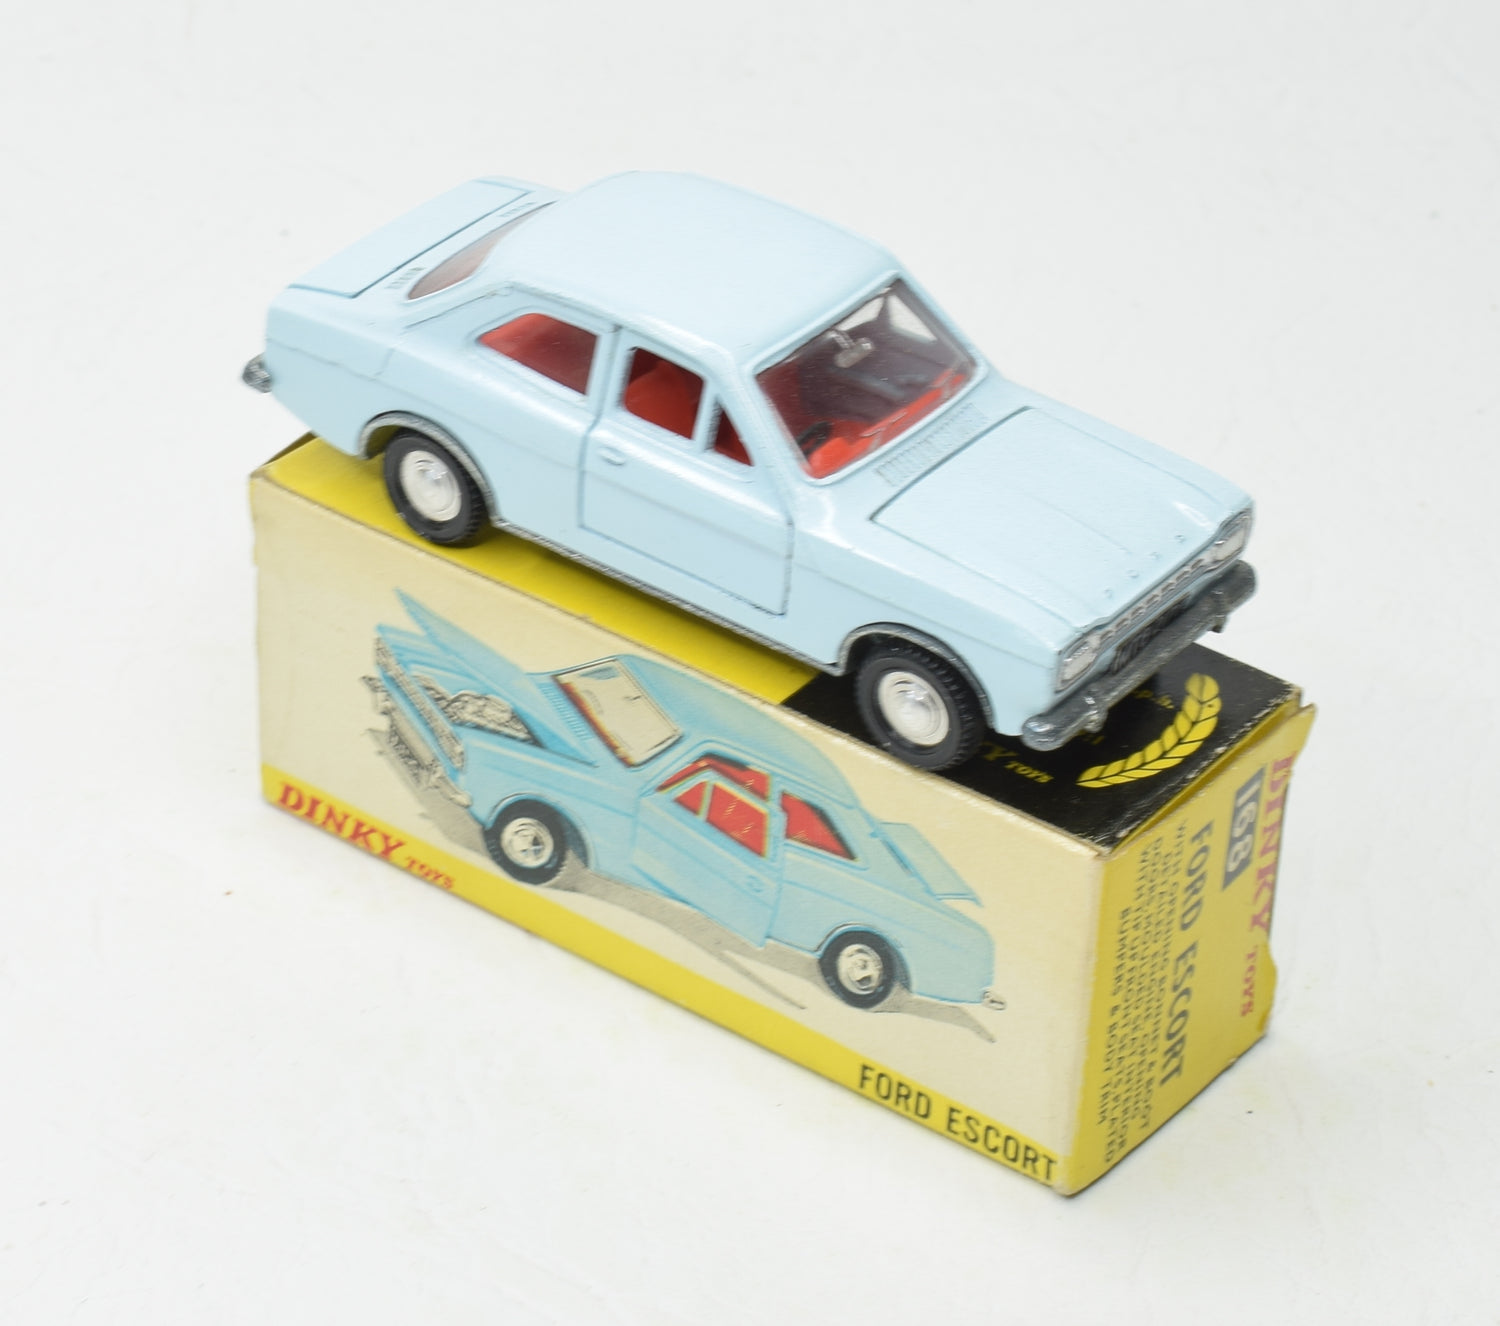 Dinky toys 168 Ford Escort Very Near Mint/Boxed The 'Geneva' Collection